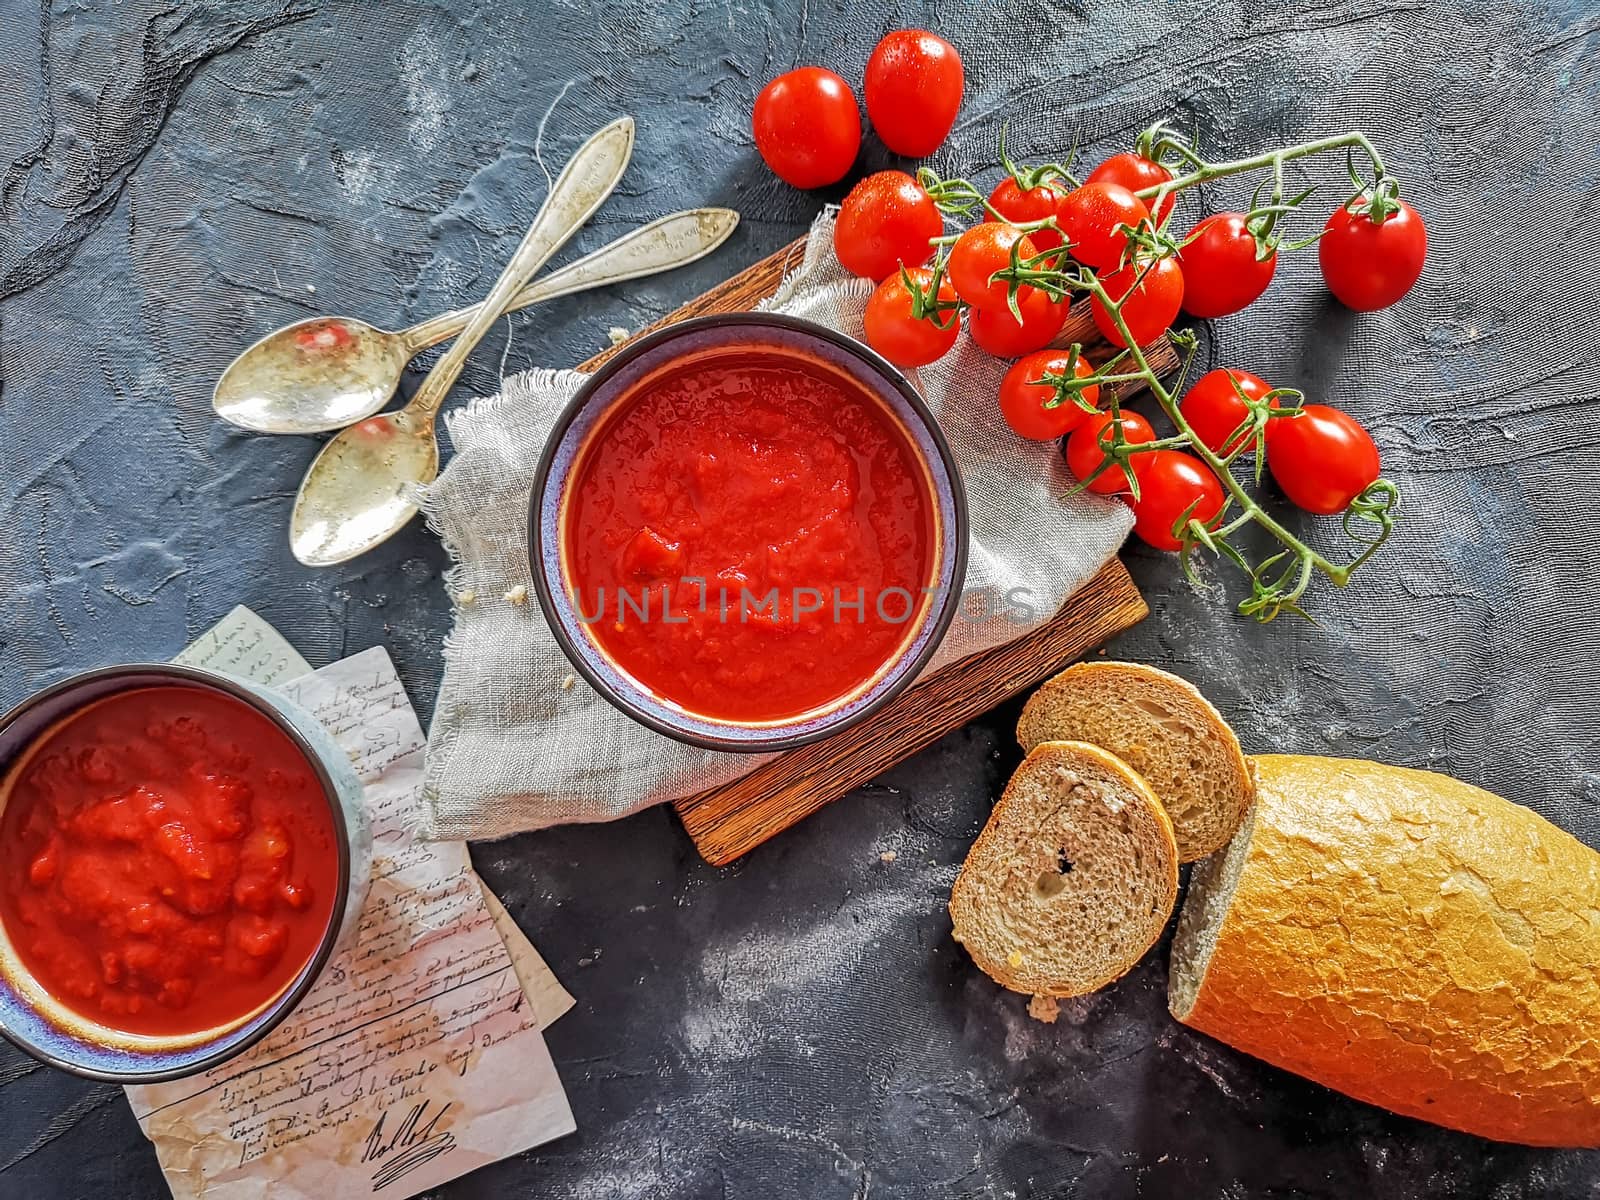 Flat lay of tomato soup with paper notes, bread, old spoons and cherry tomatoes